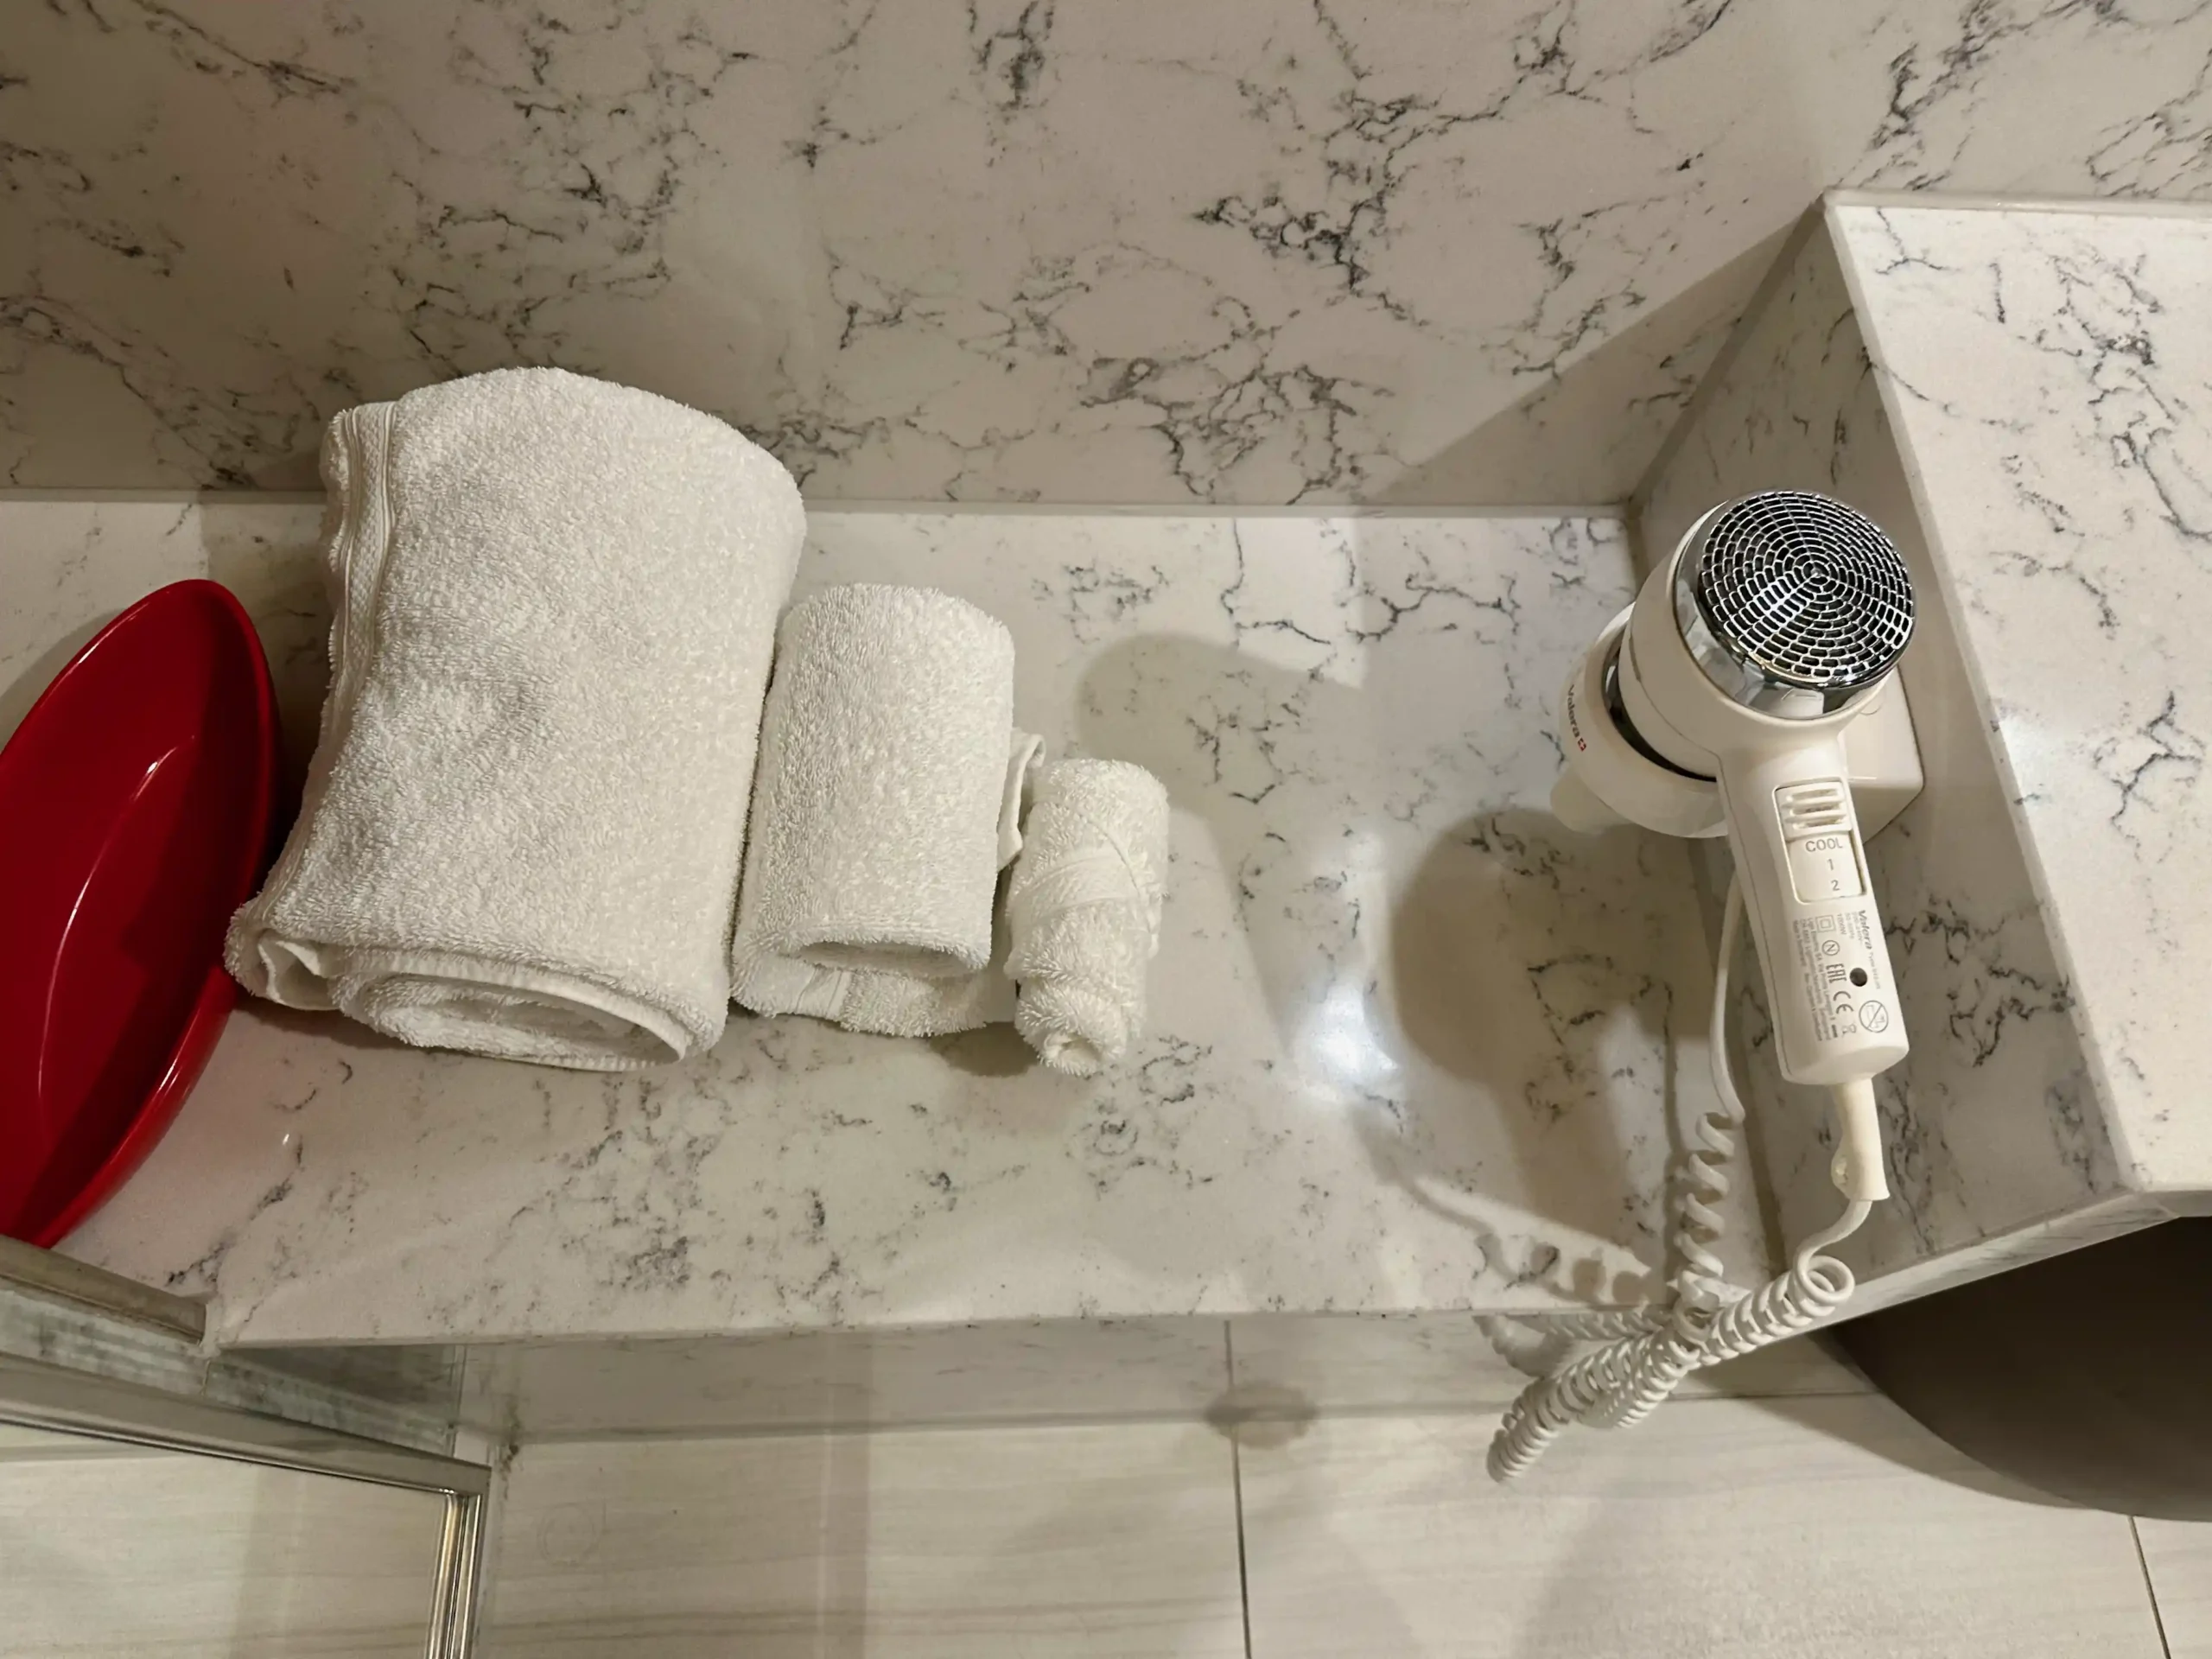 a white towel and hair dryer on a marble counter